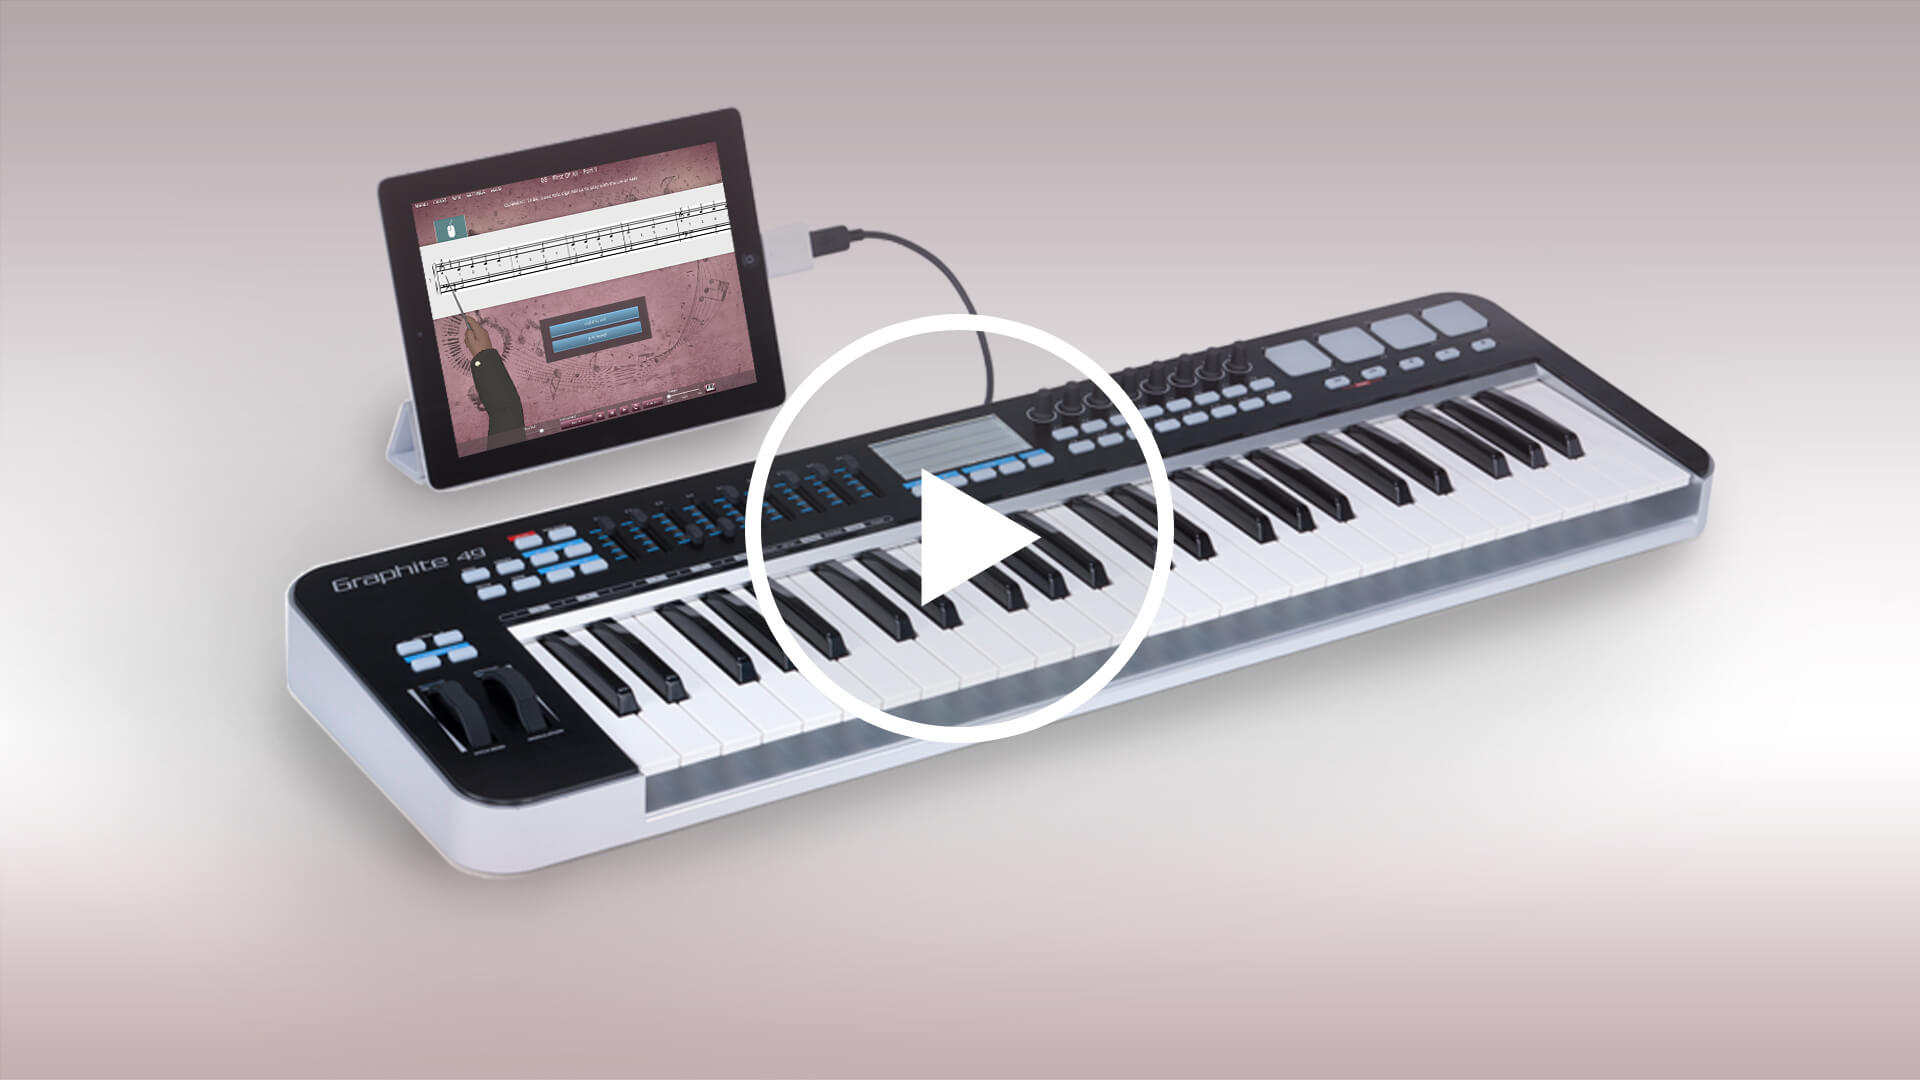 MIDI keyboard connected to iPad with cable